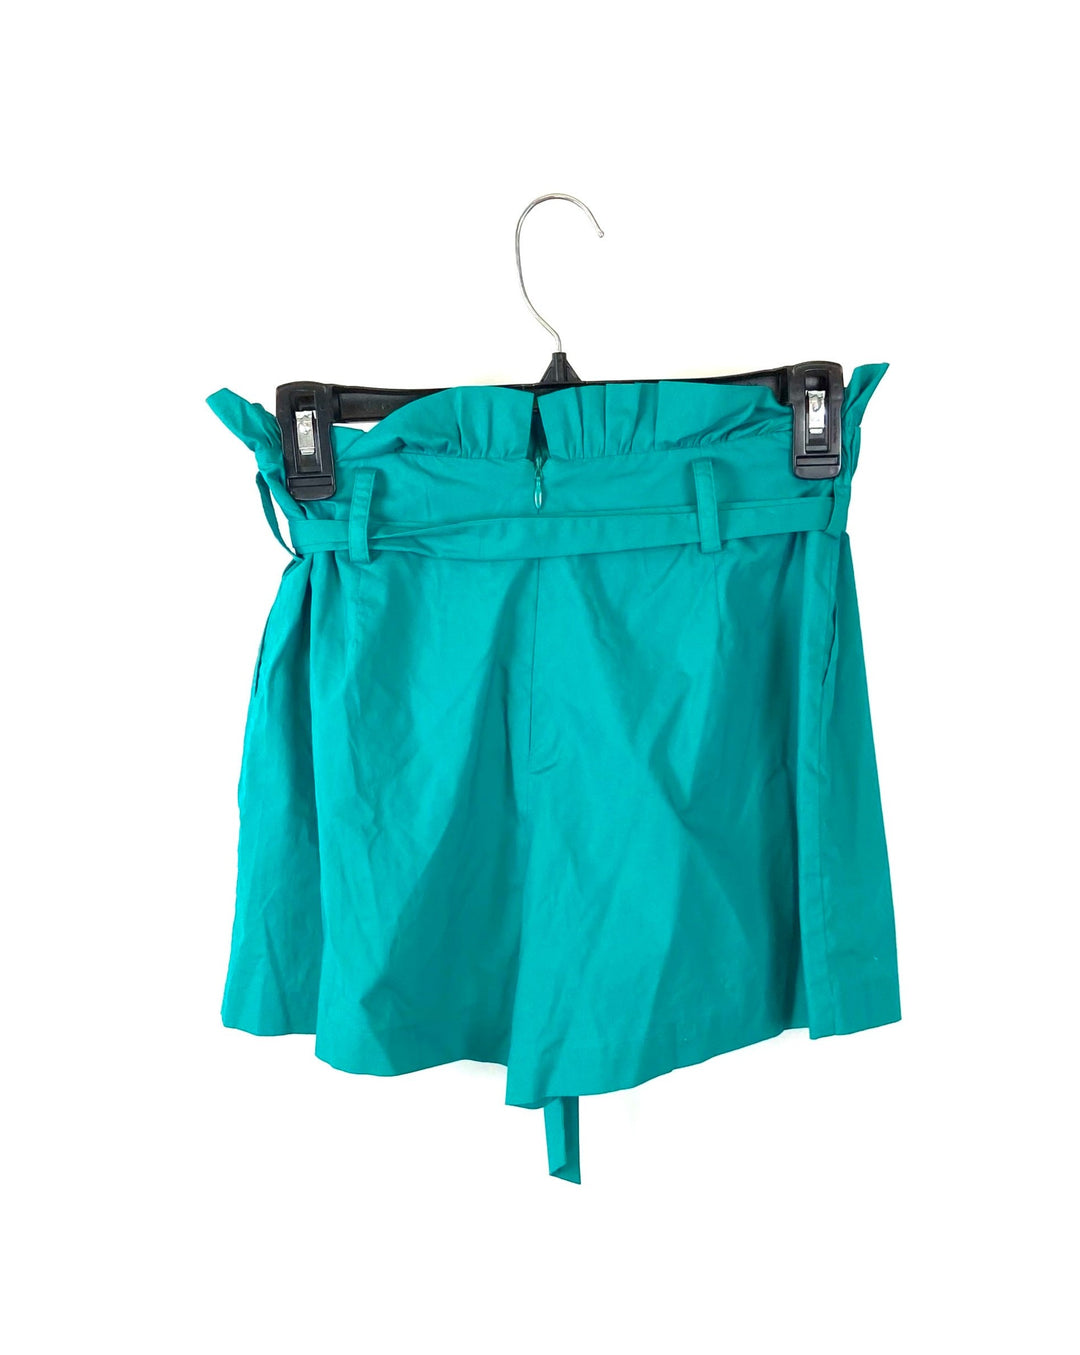 Teal Shorts - Size 4-6